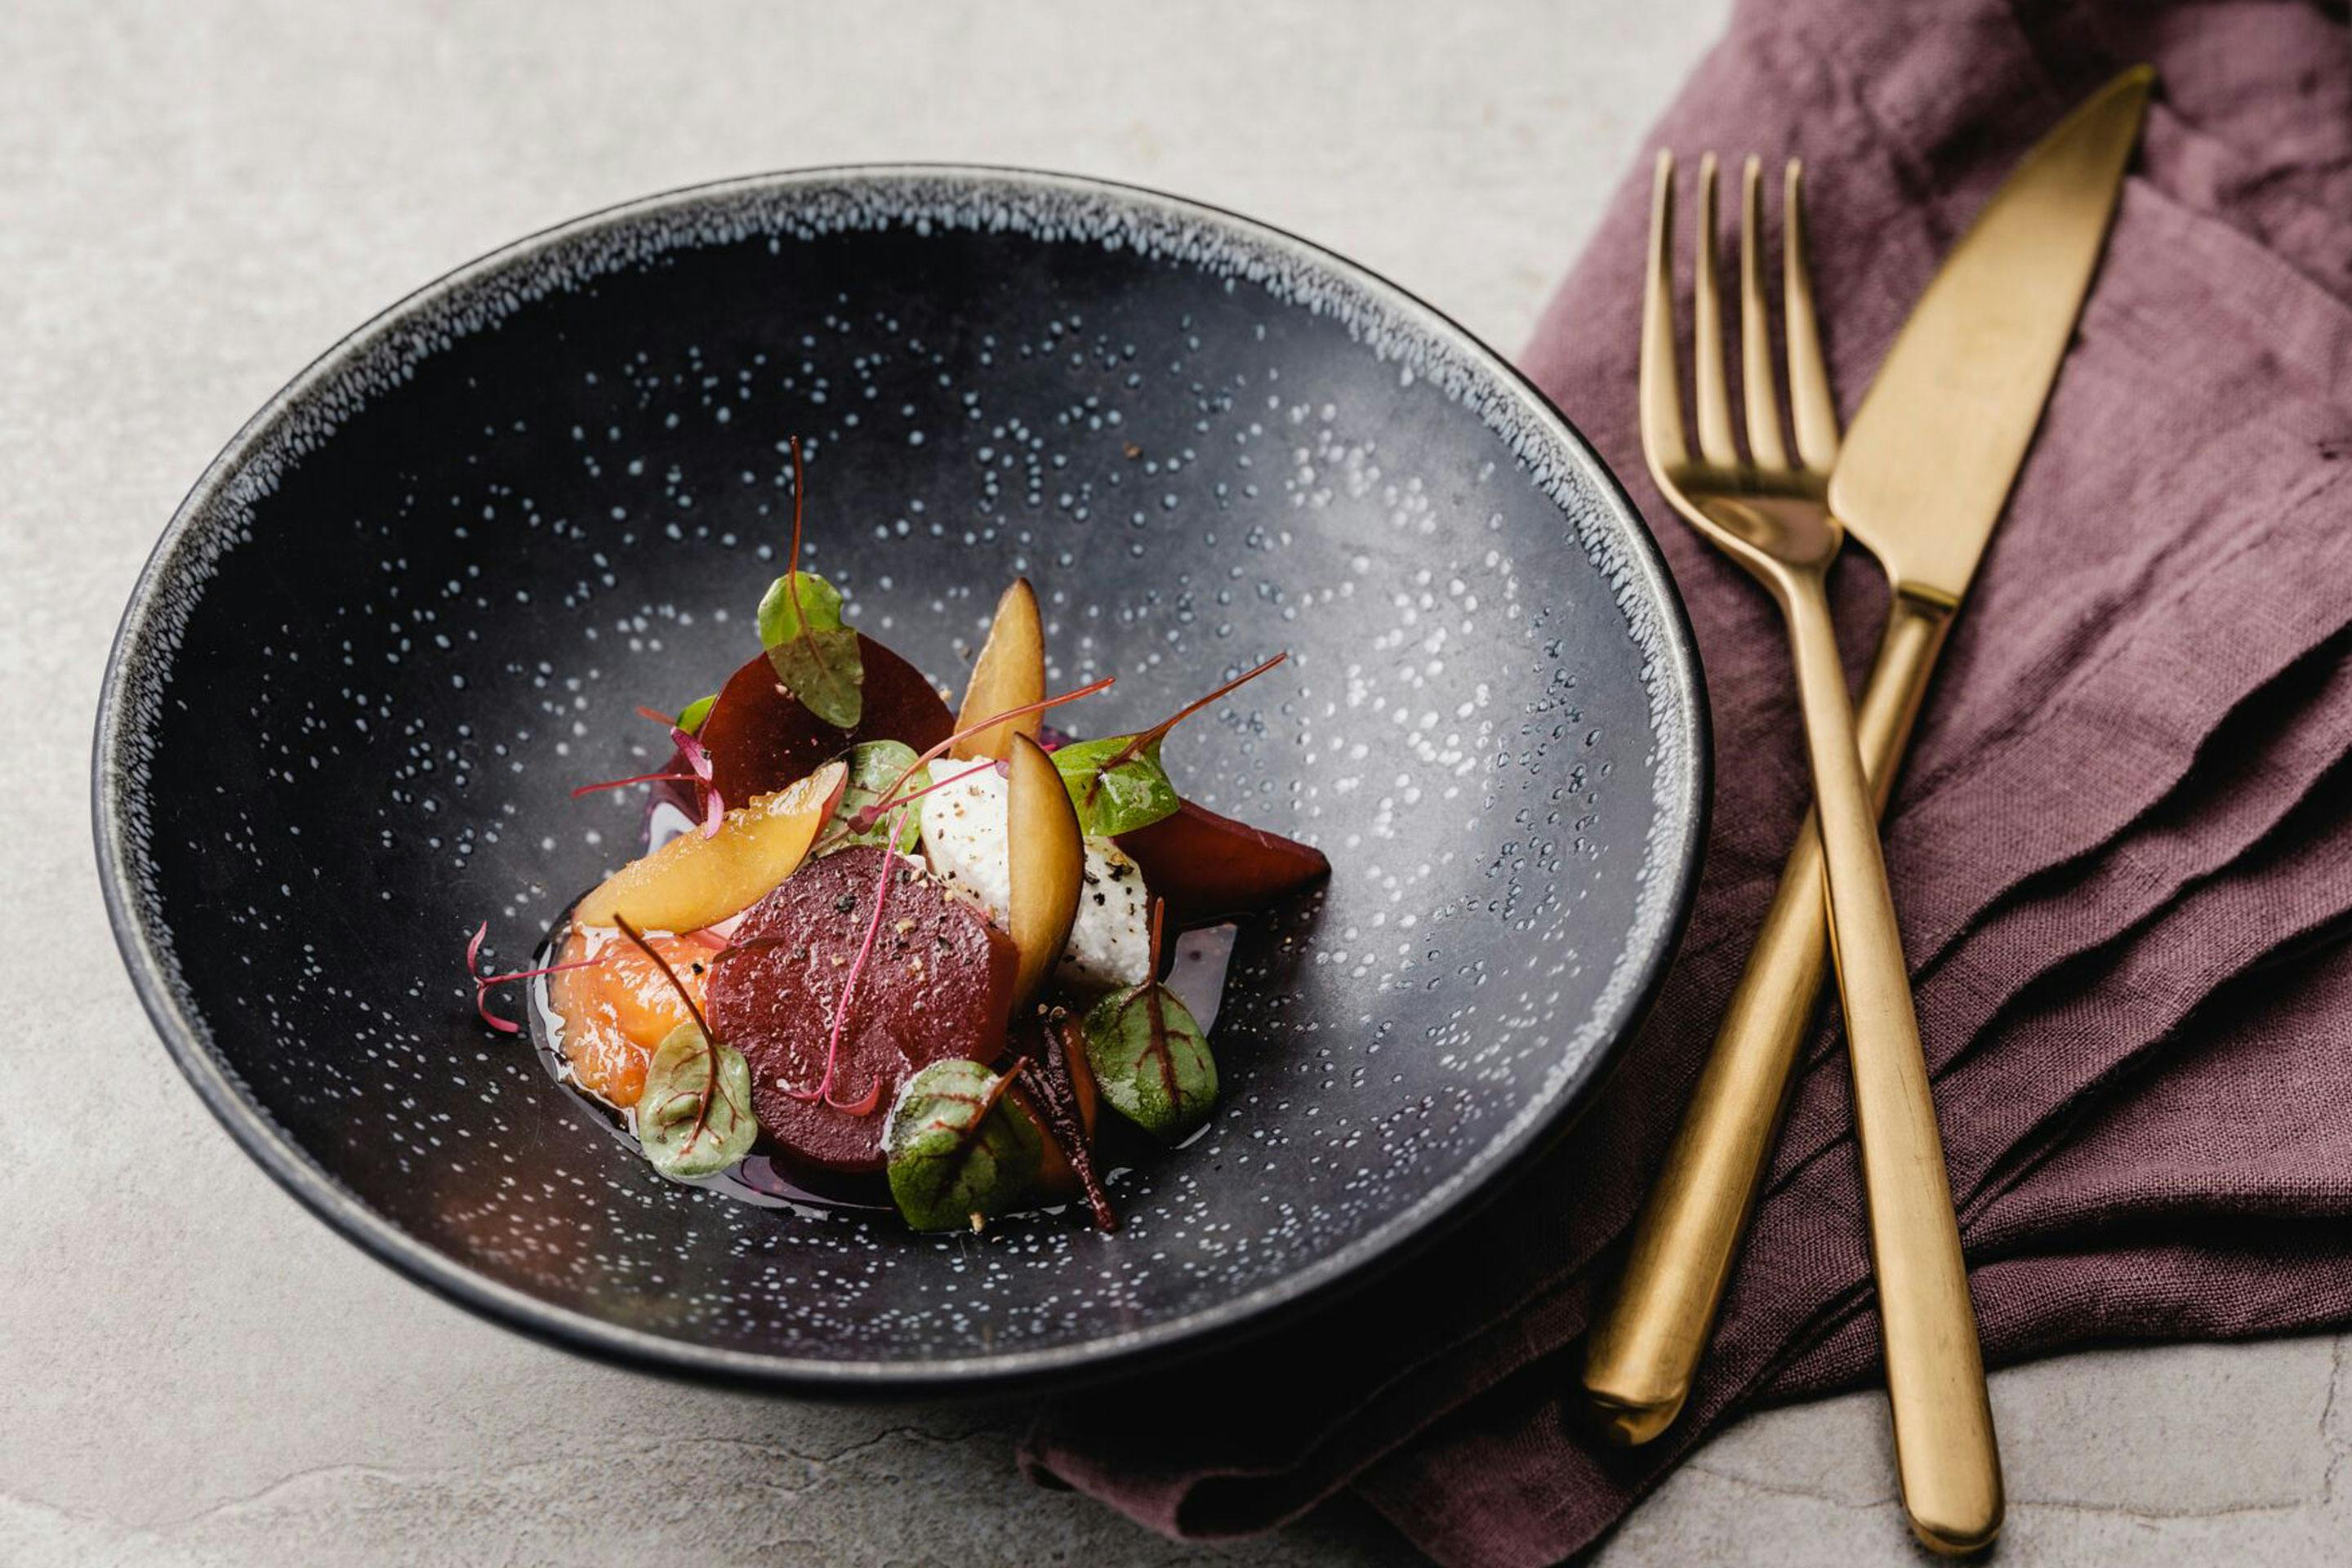 Lukewarm beets with caramelized plums and fresh goat's cheese in a black deep plate with gold cutlery